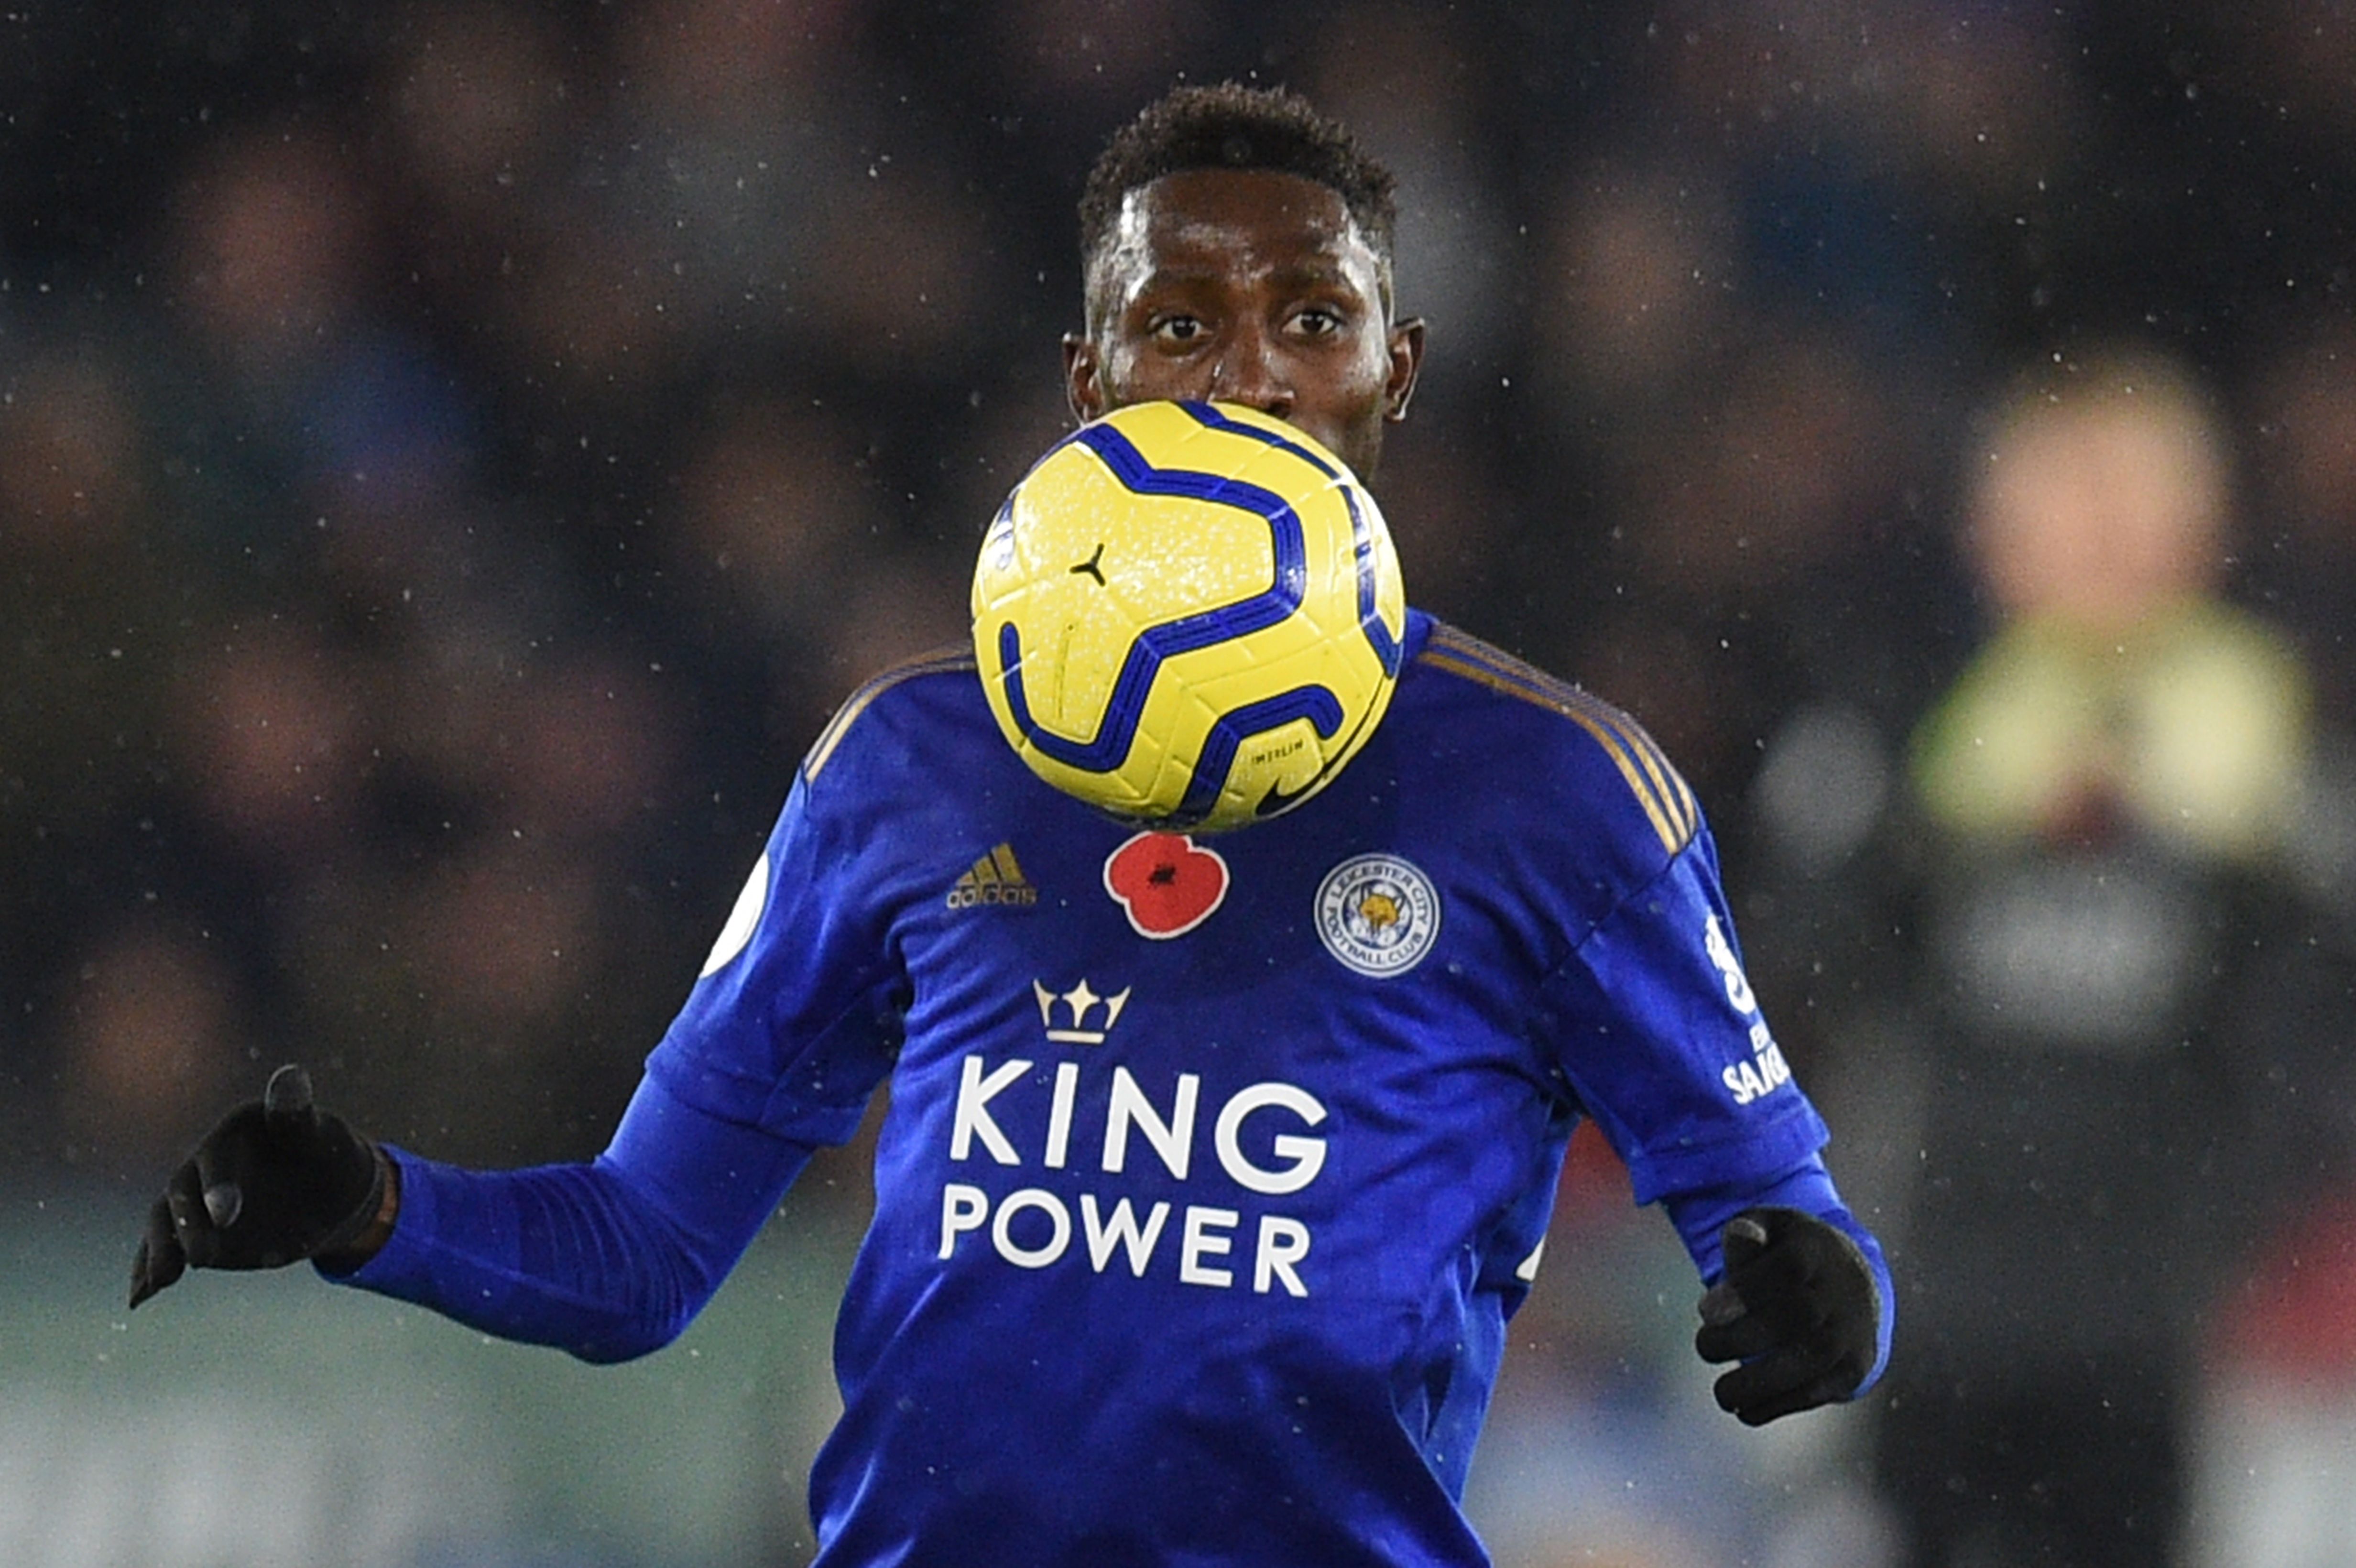 Leicester City's Nigerian midfielder Wilfred Ndidi controls the ball during the English Premier League football match between Leicester City and Arsenal at King Power Stadium in Leicester, central England on November 9, 2019. (Photo by Oli SCARFF / AFP) / RESTRICTED TO EDITORIAL USE. No use with unauthorized audio, video, data, fixture lists, club/league logos or 'live' services. Online in-match use limited to 120 images. An additional 40 images may be used in extra time. No video emulation. Social media in-match use limited to 120 images. An additional 40 images may be used in extra time. No use in betting publications, games or single club/league/player publications. /  (Photo by OLI SCARFF/AFP via Getty Images)